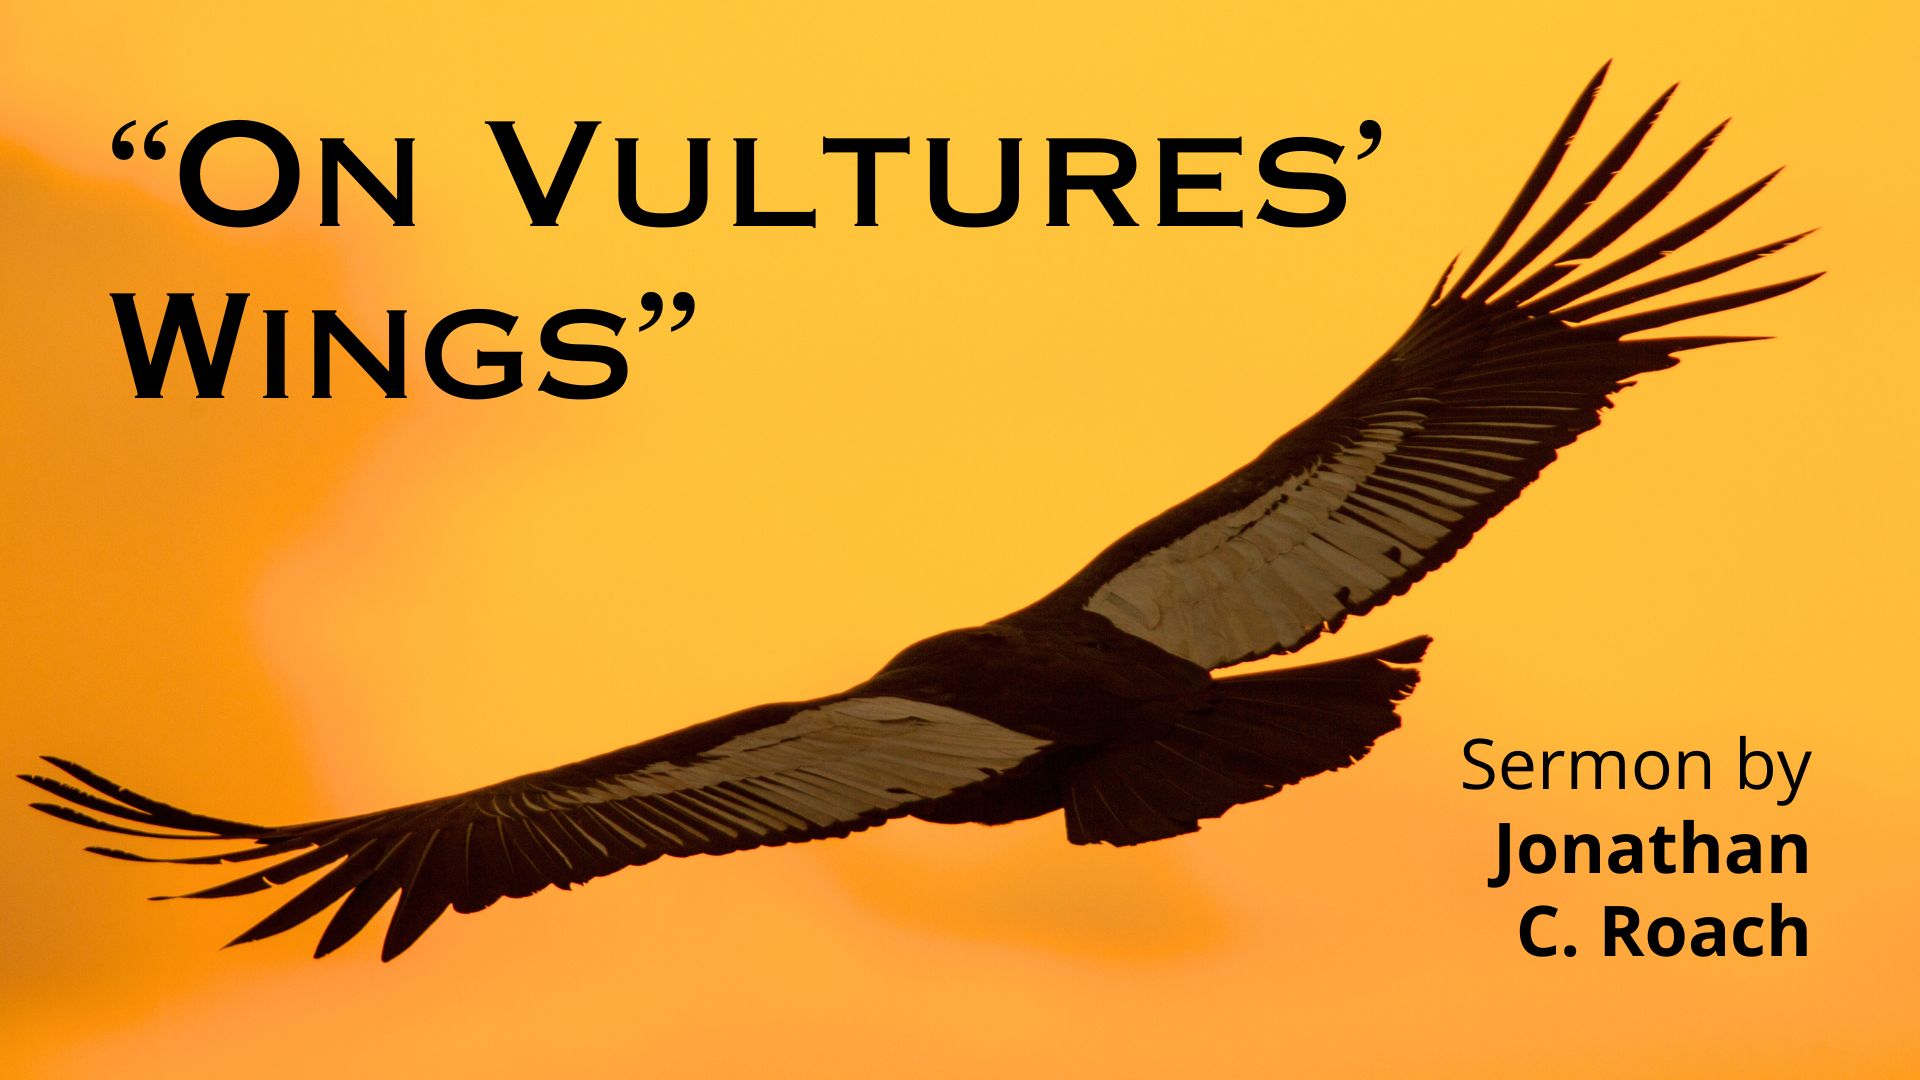 image of vulture flying with wings spread text reads "on vultures' wings" and smaller text in corner reads sermon by jonathan c roach